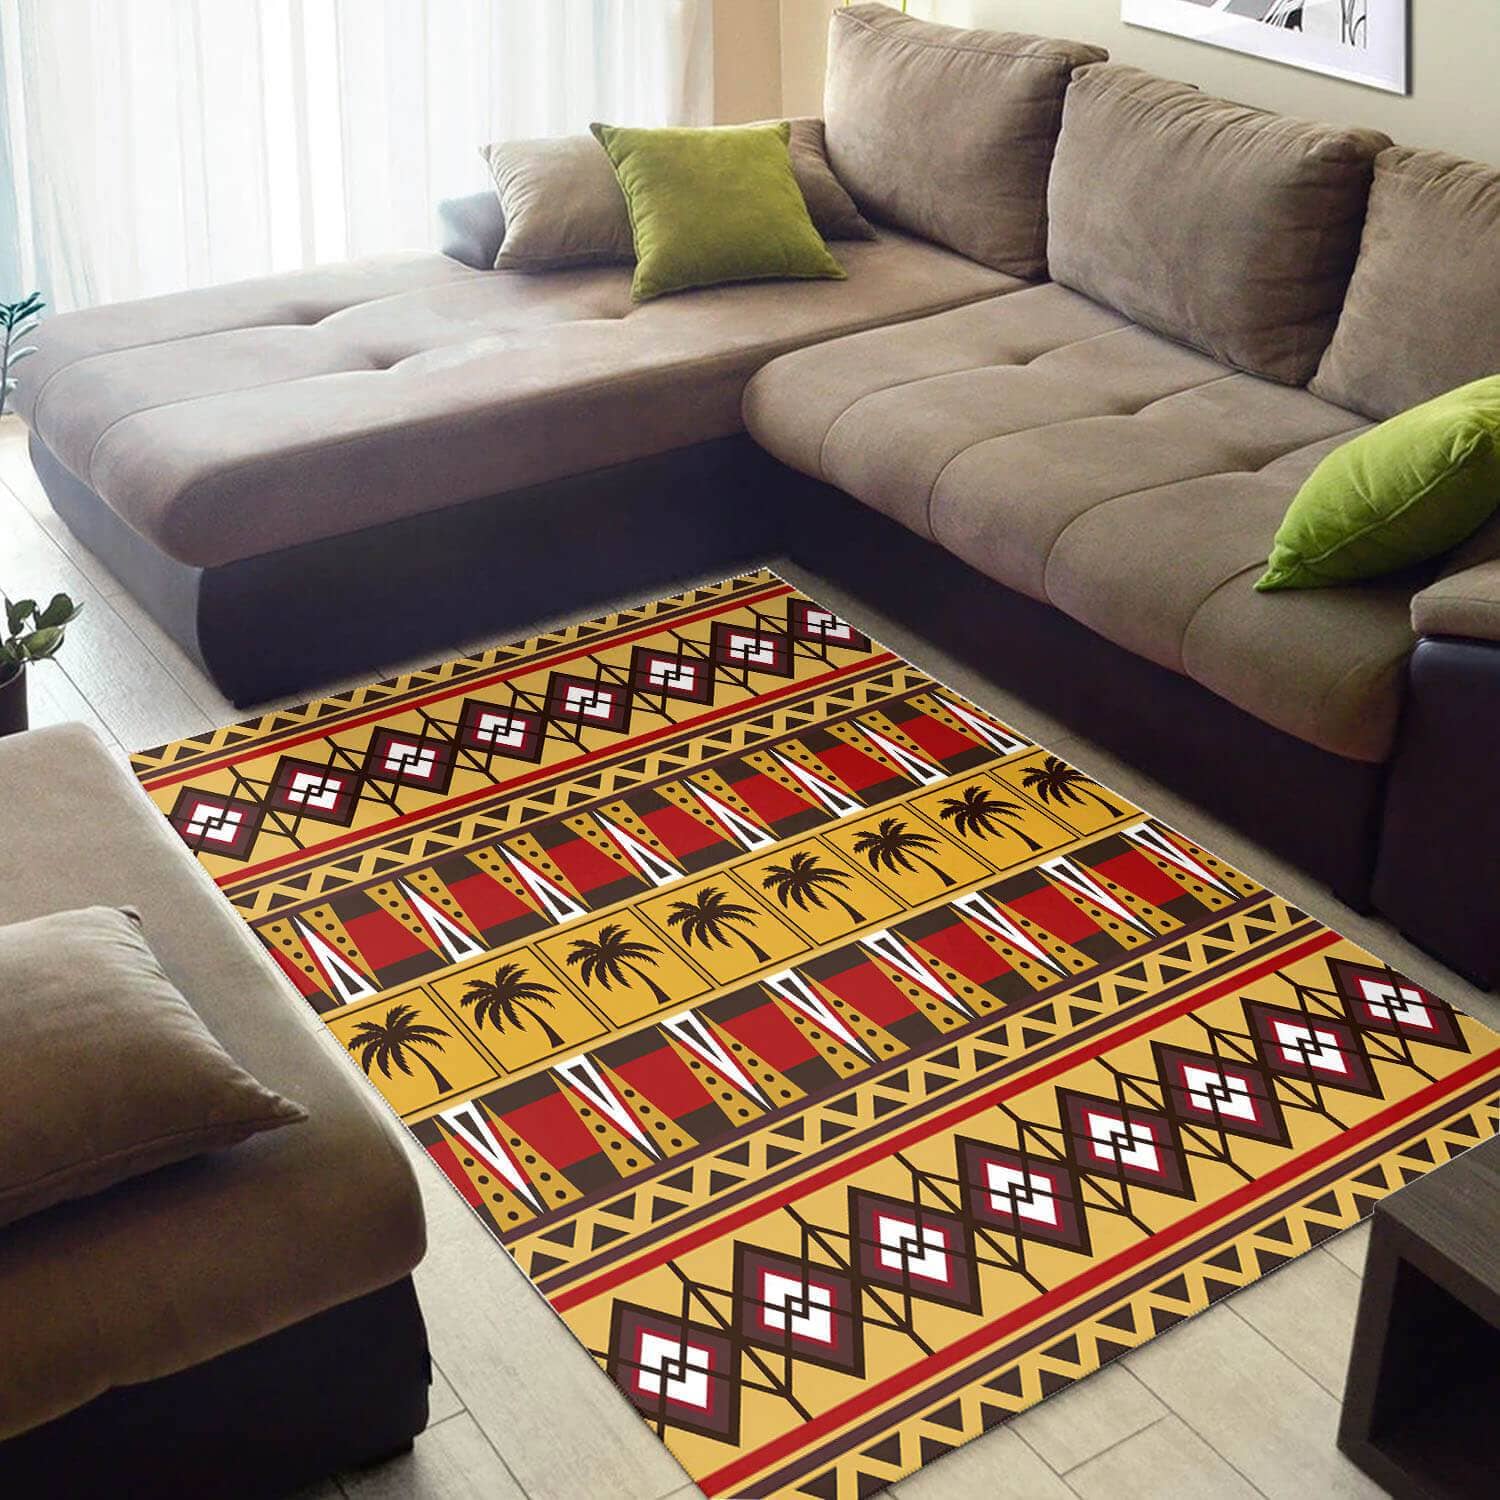 Modern African Unique Black History Month Afrocentric Pattern Art Large Themed Home Rug